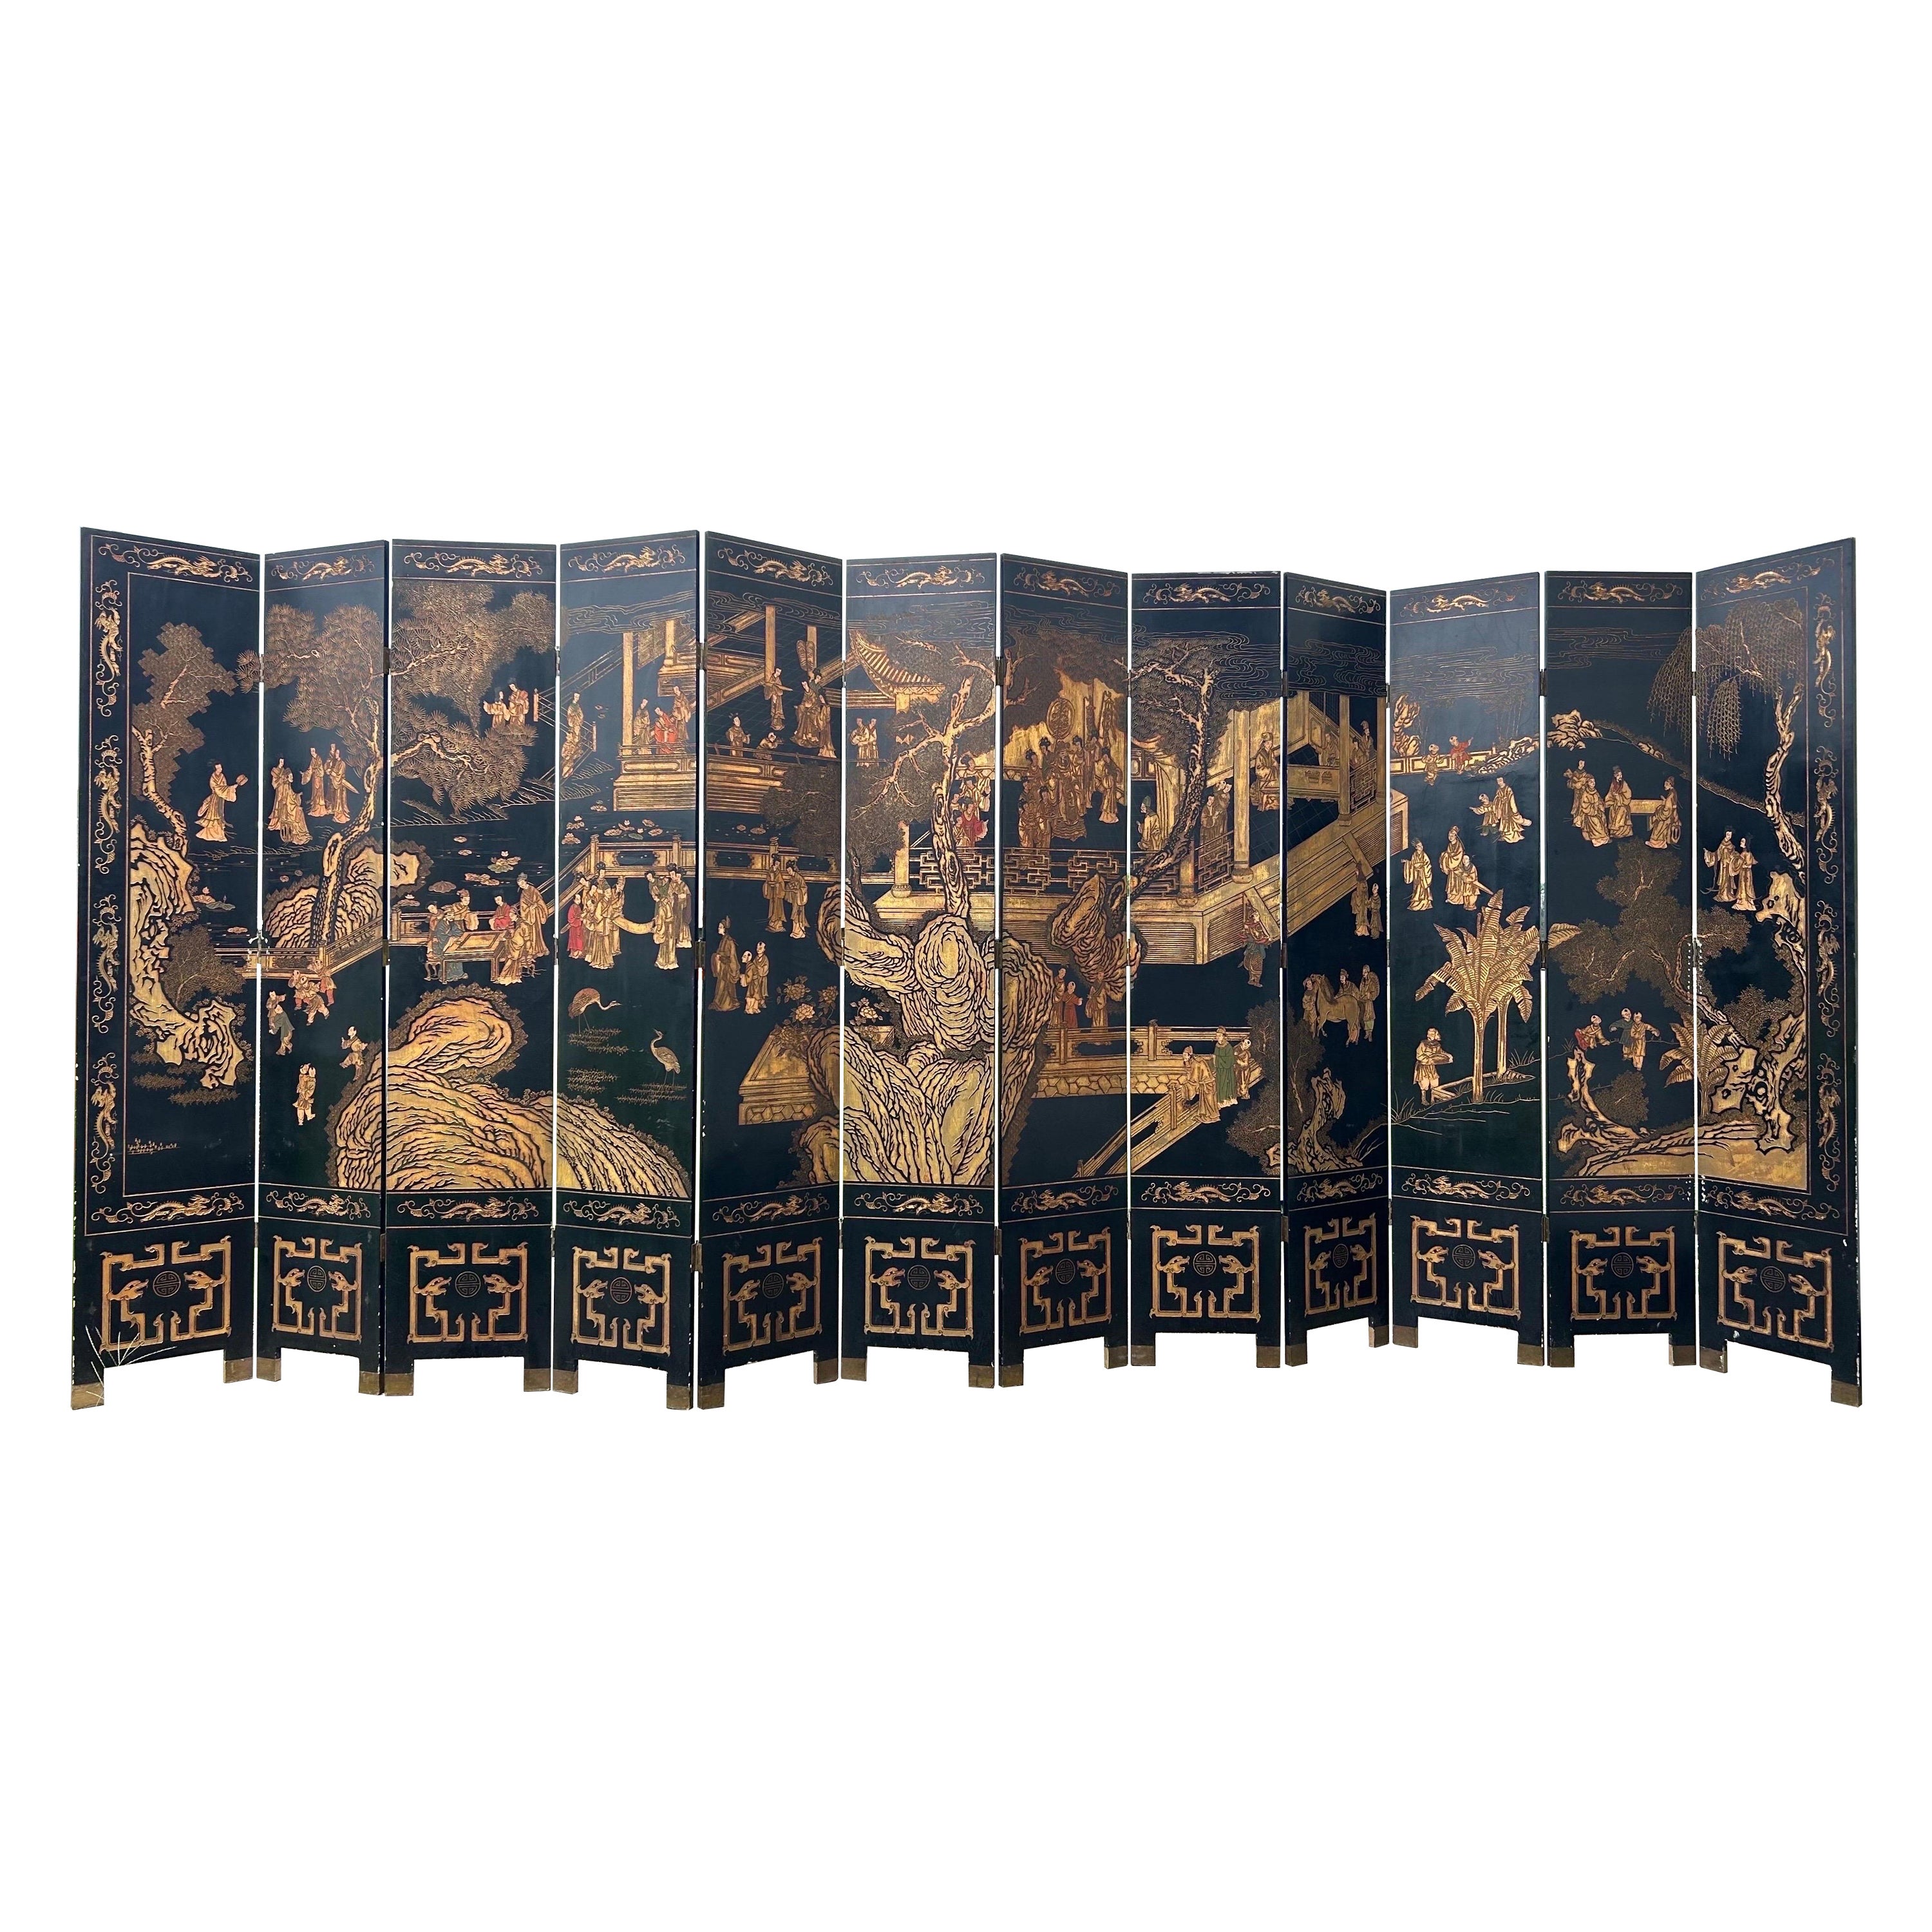 Incredible 18’ wide 12 panel lacquered chinoiserie screen For Sale